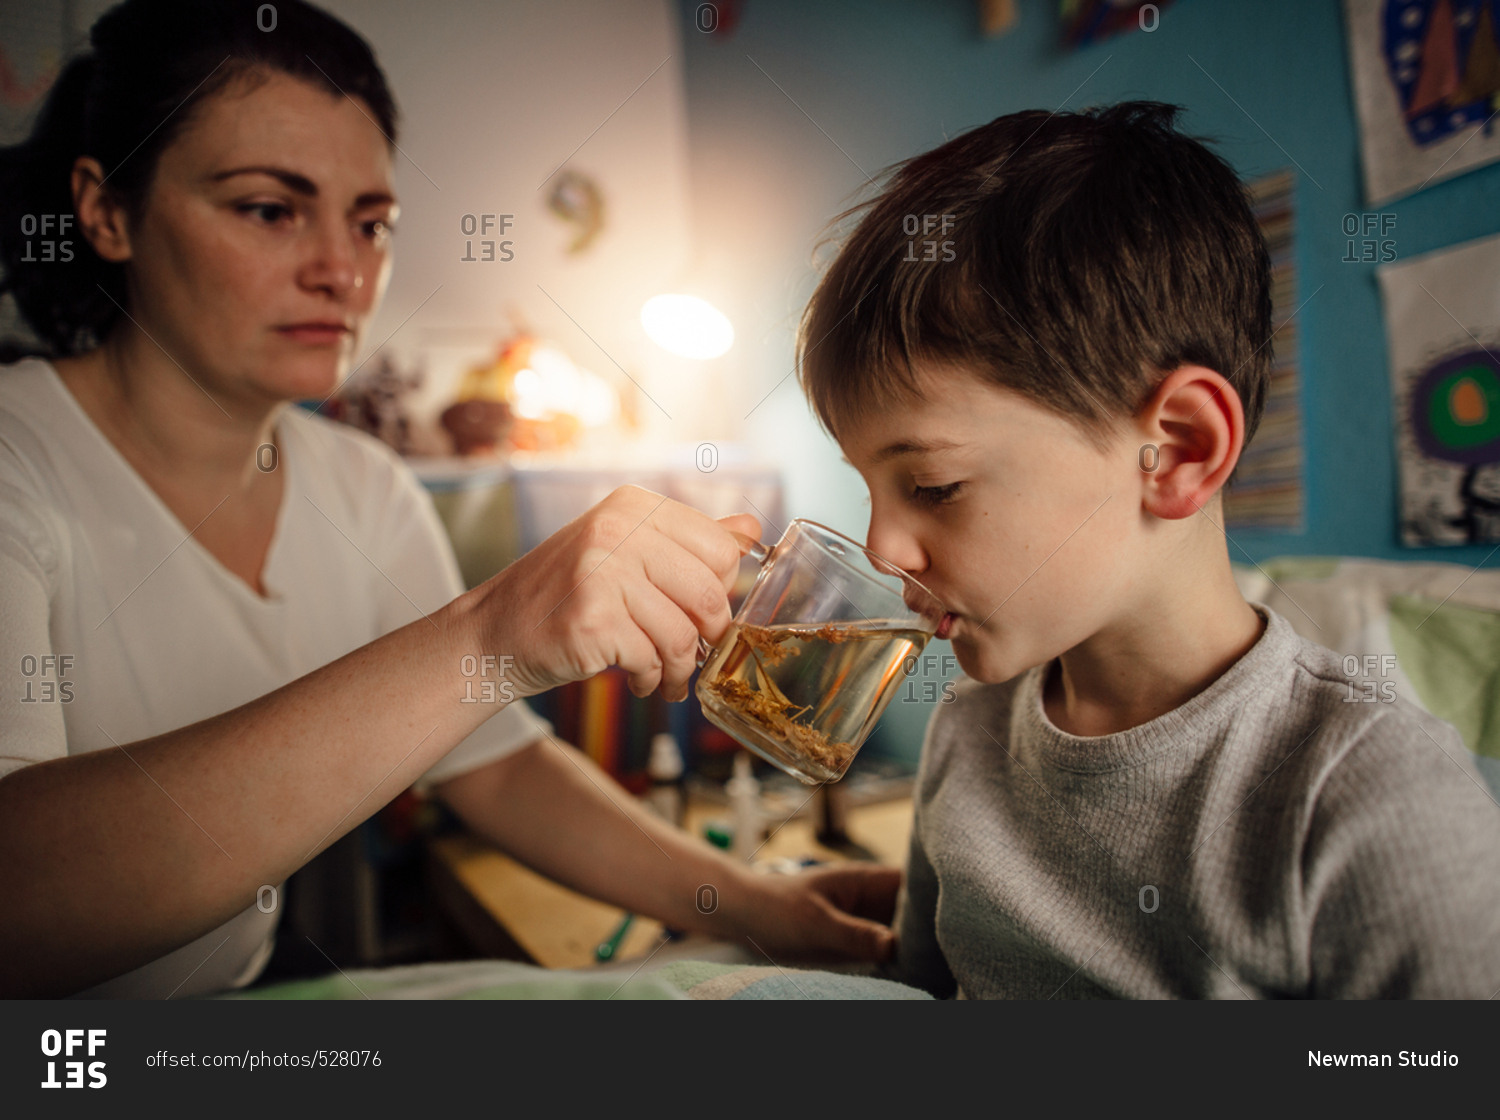 Child feeling unwell drinking a herbal tea from his mother